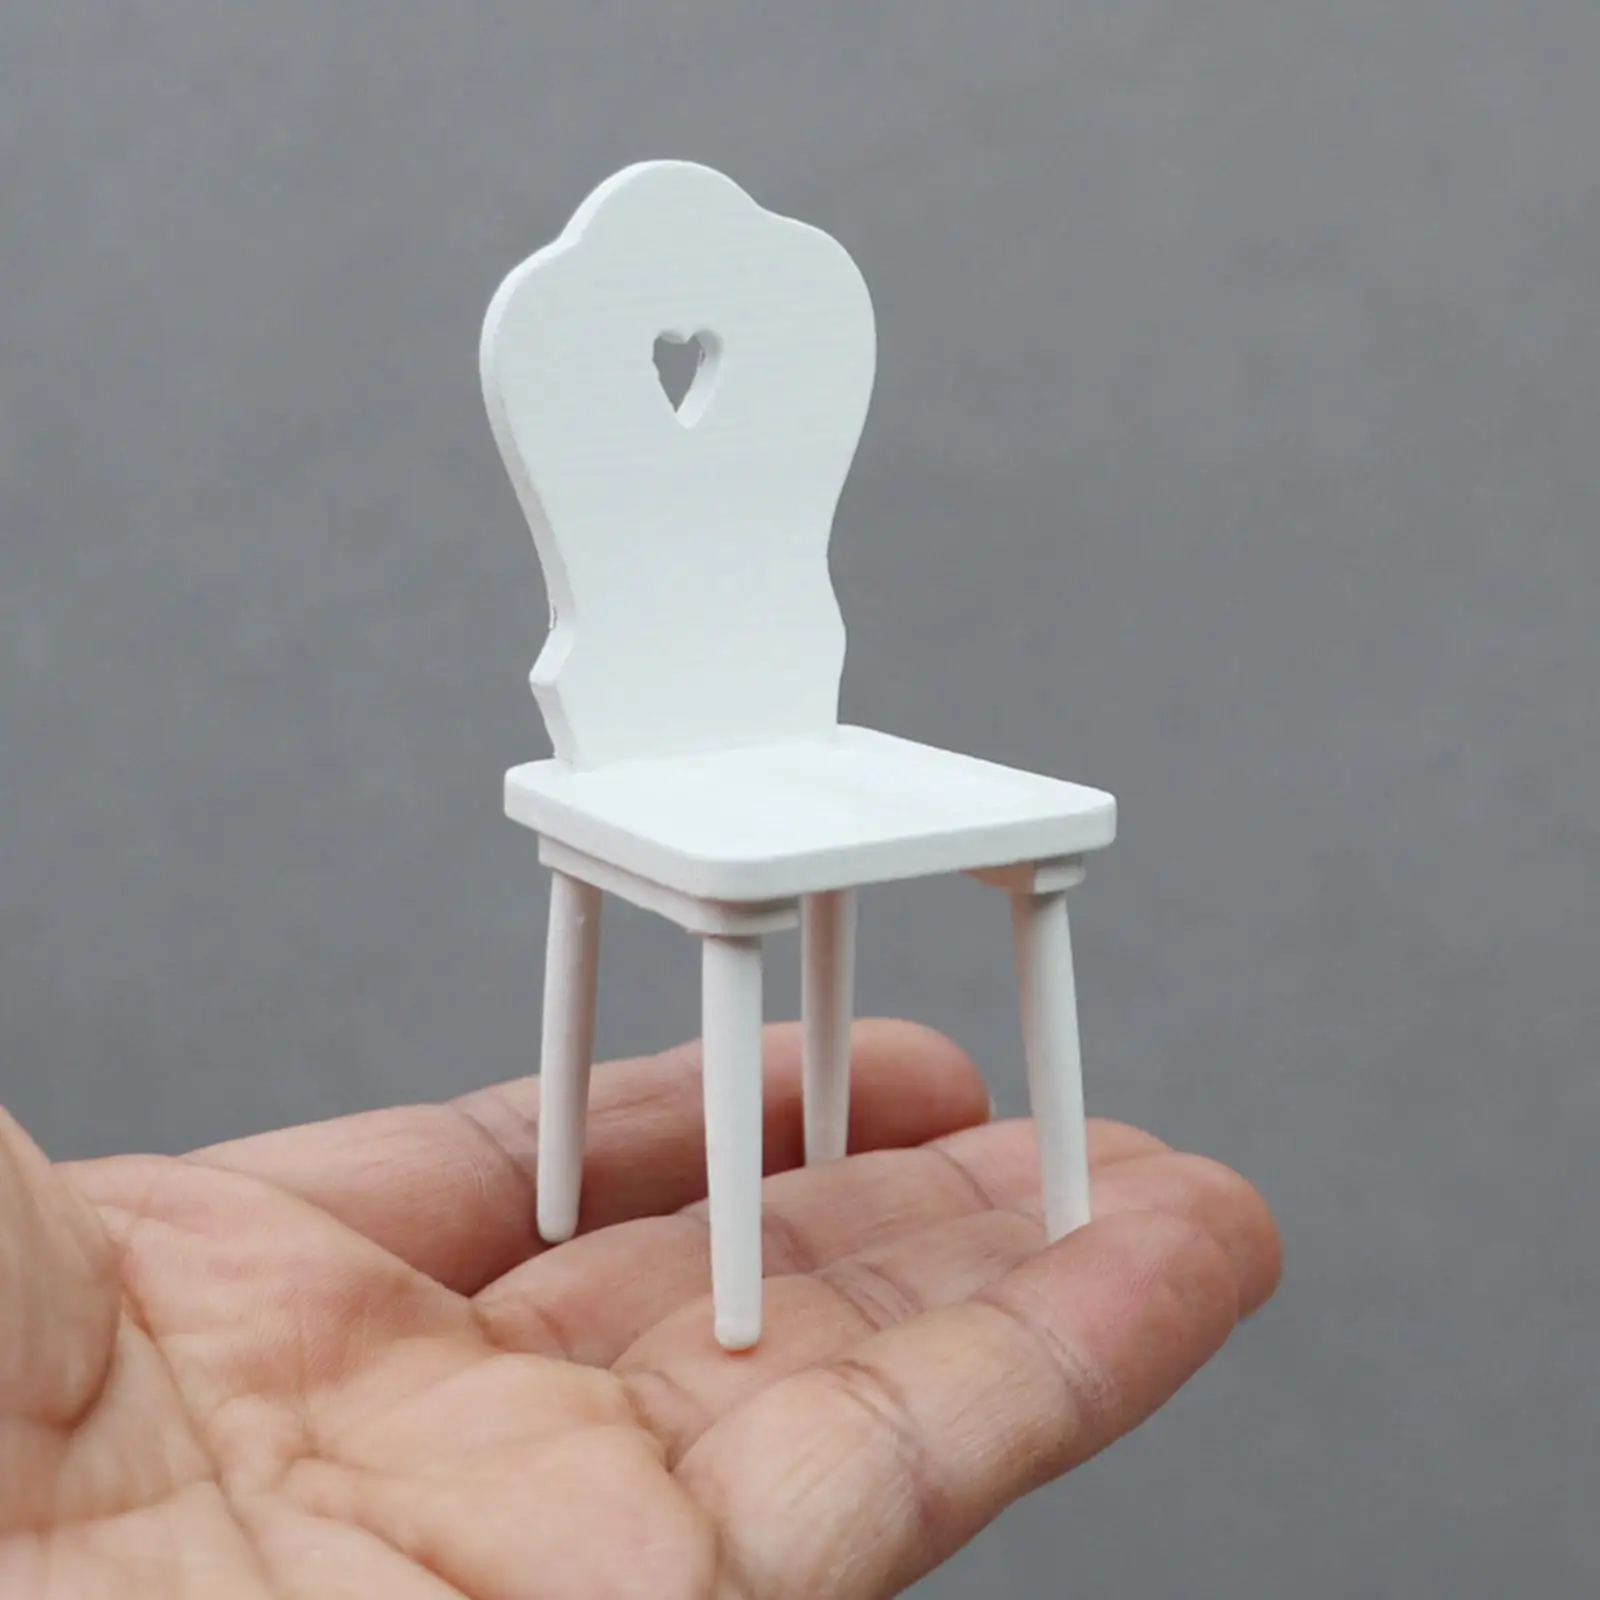 1/12 Miniature Chair Ornament 1/12 Miniature Chair Model for Balcony Bedroom